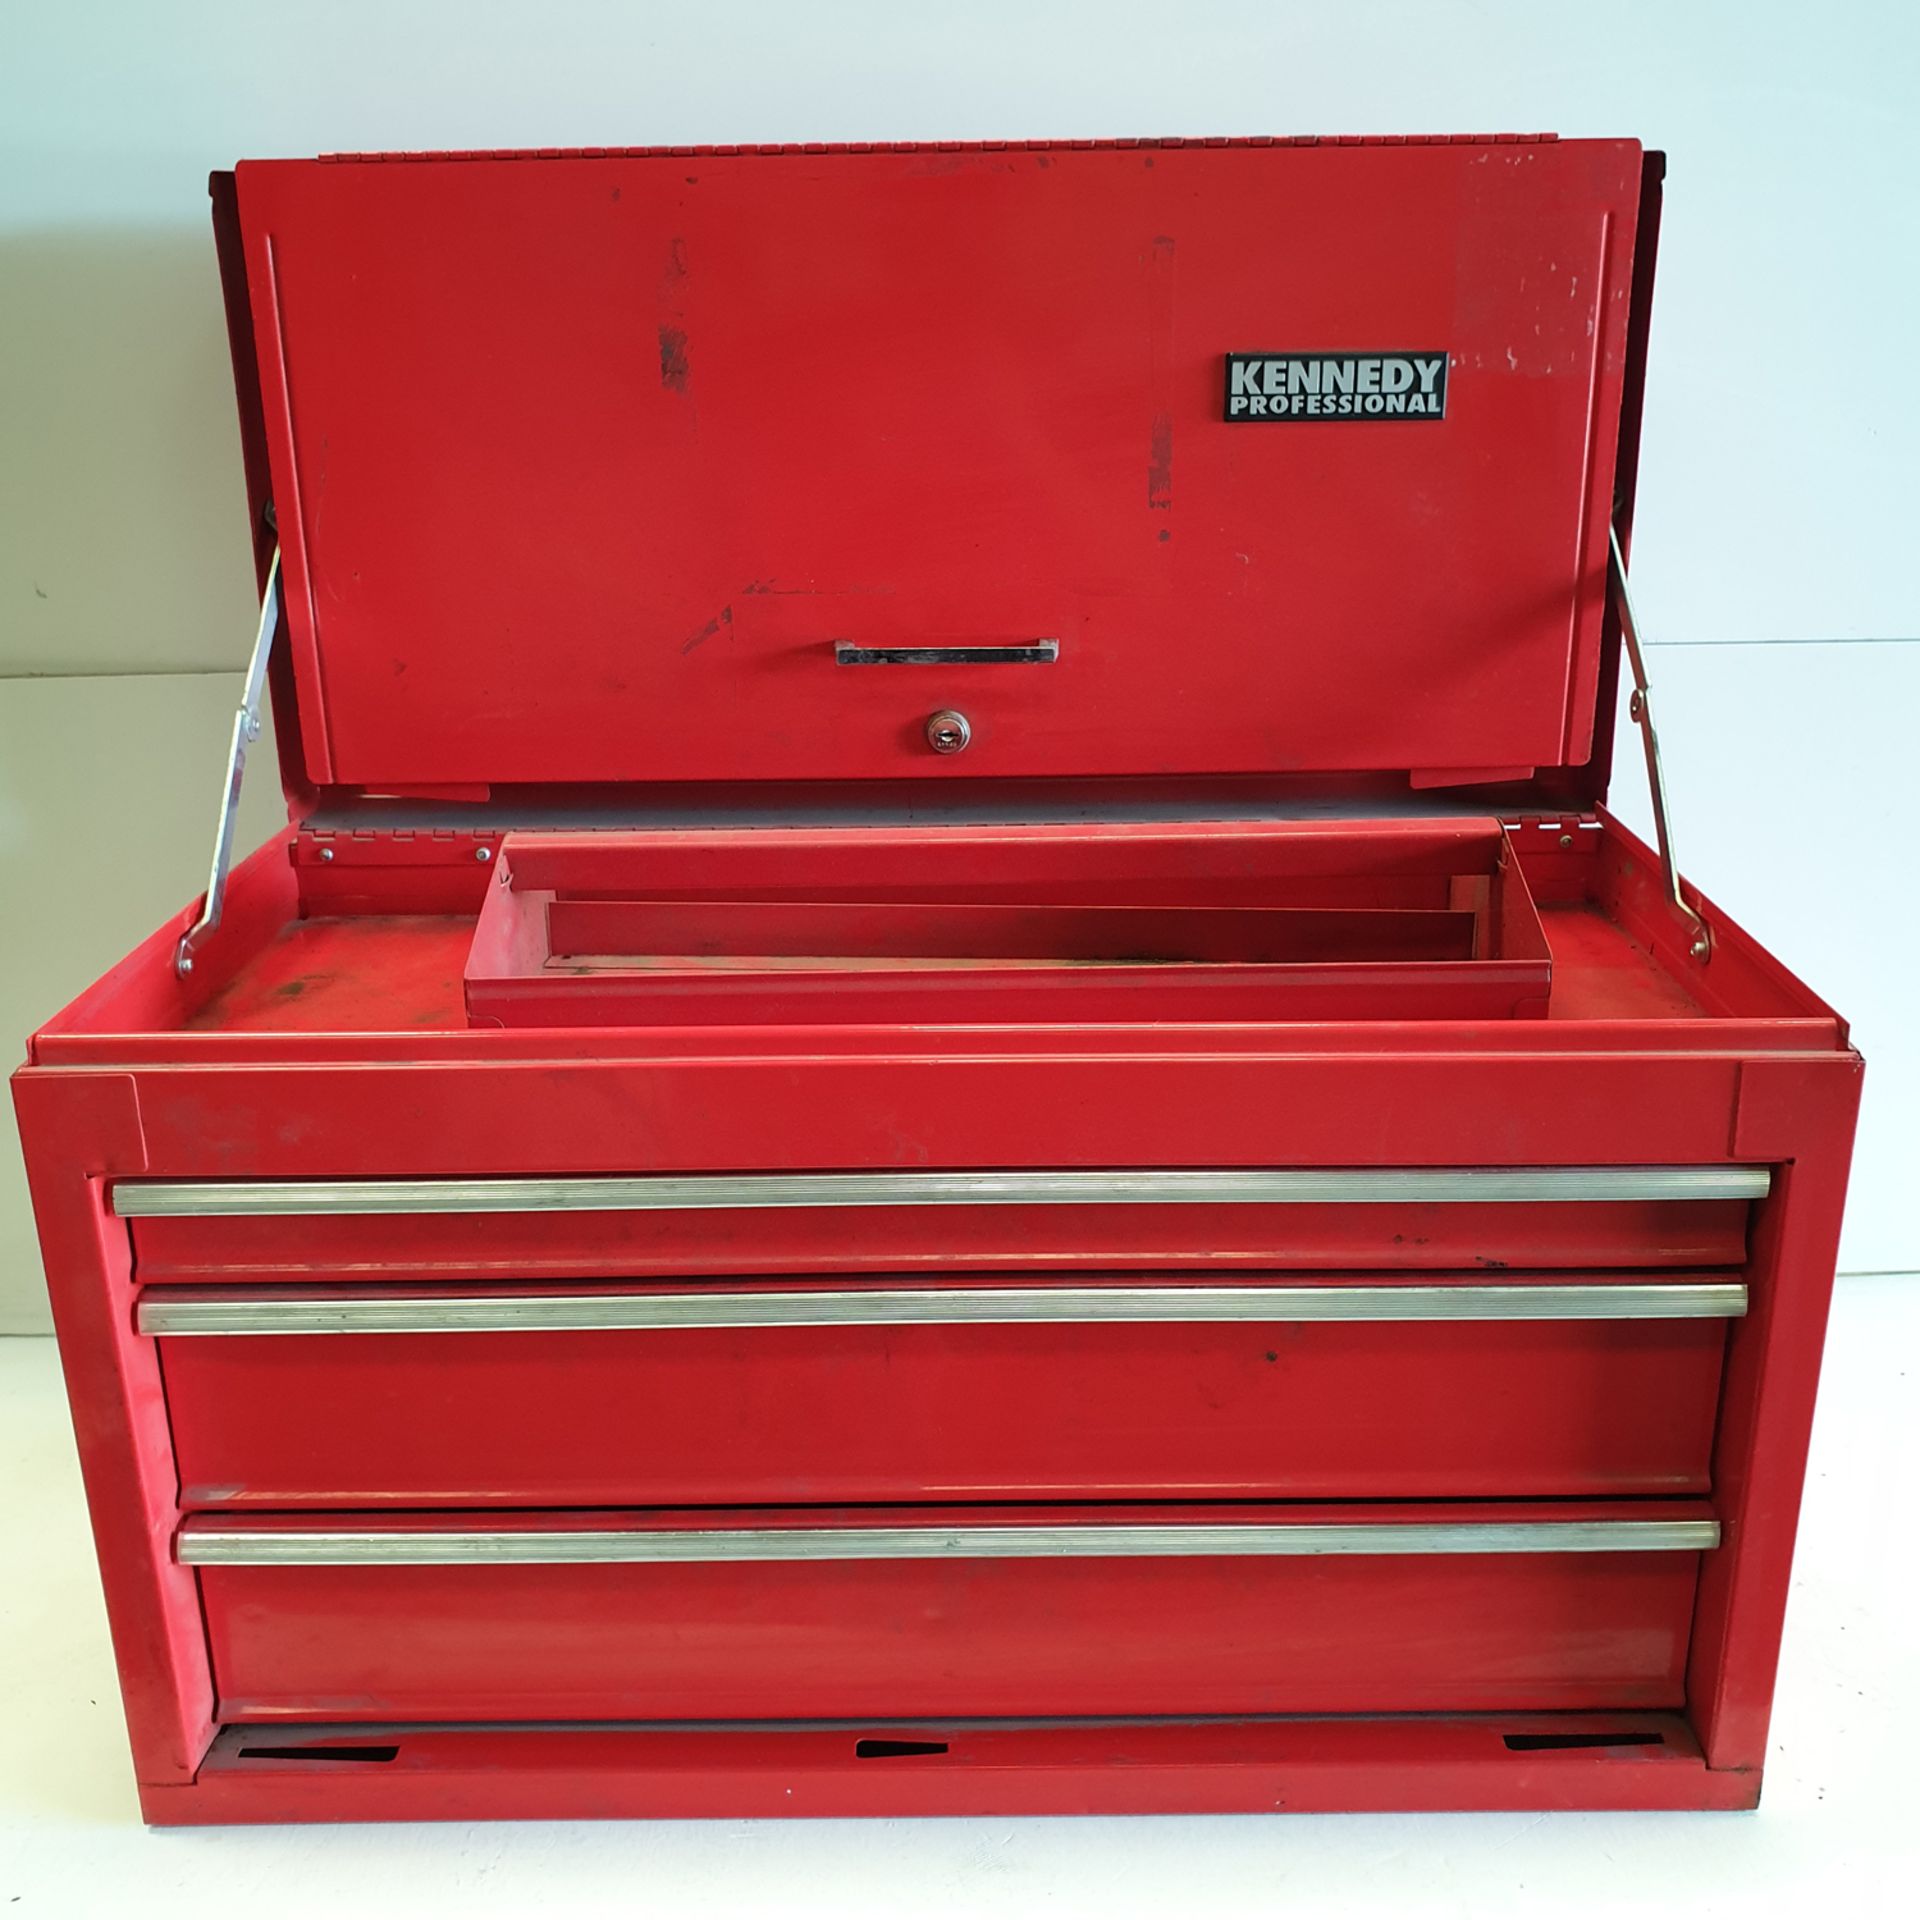 Kennedy Proffesional Steel Tool Box. Approx Dimentions 670mm x 330mm x 390mm High. - Image 2 of 7